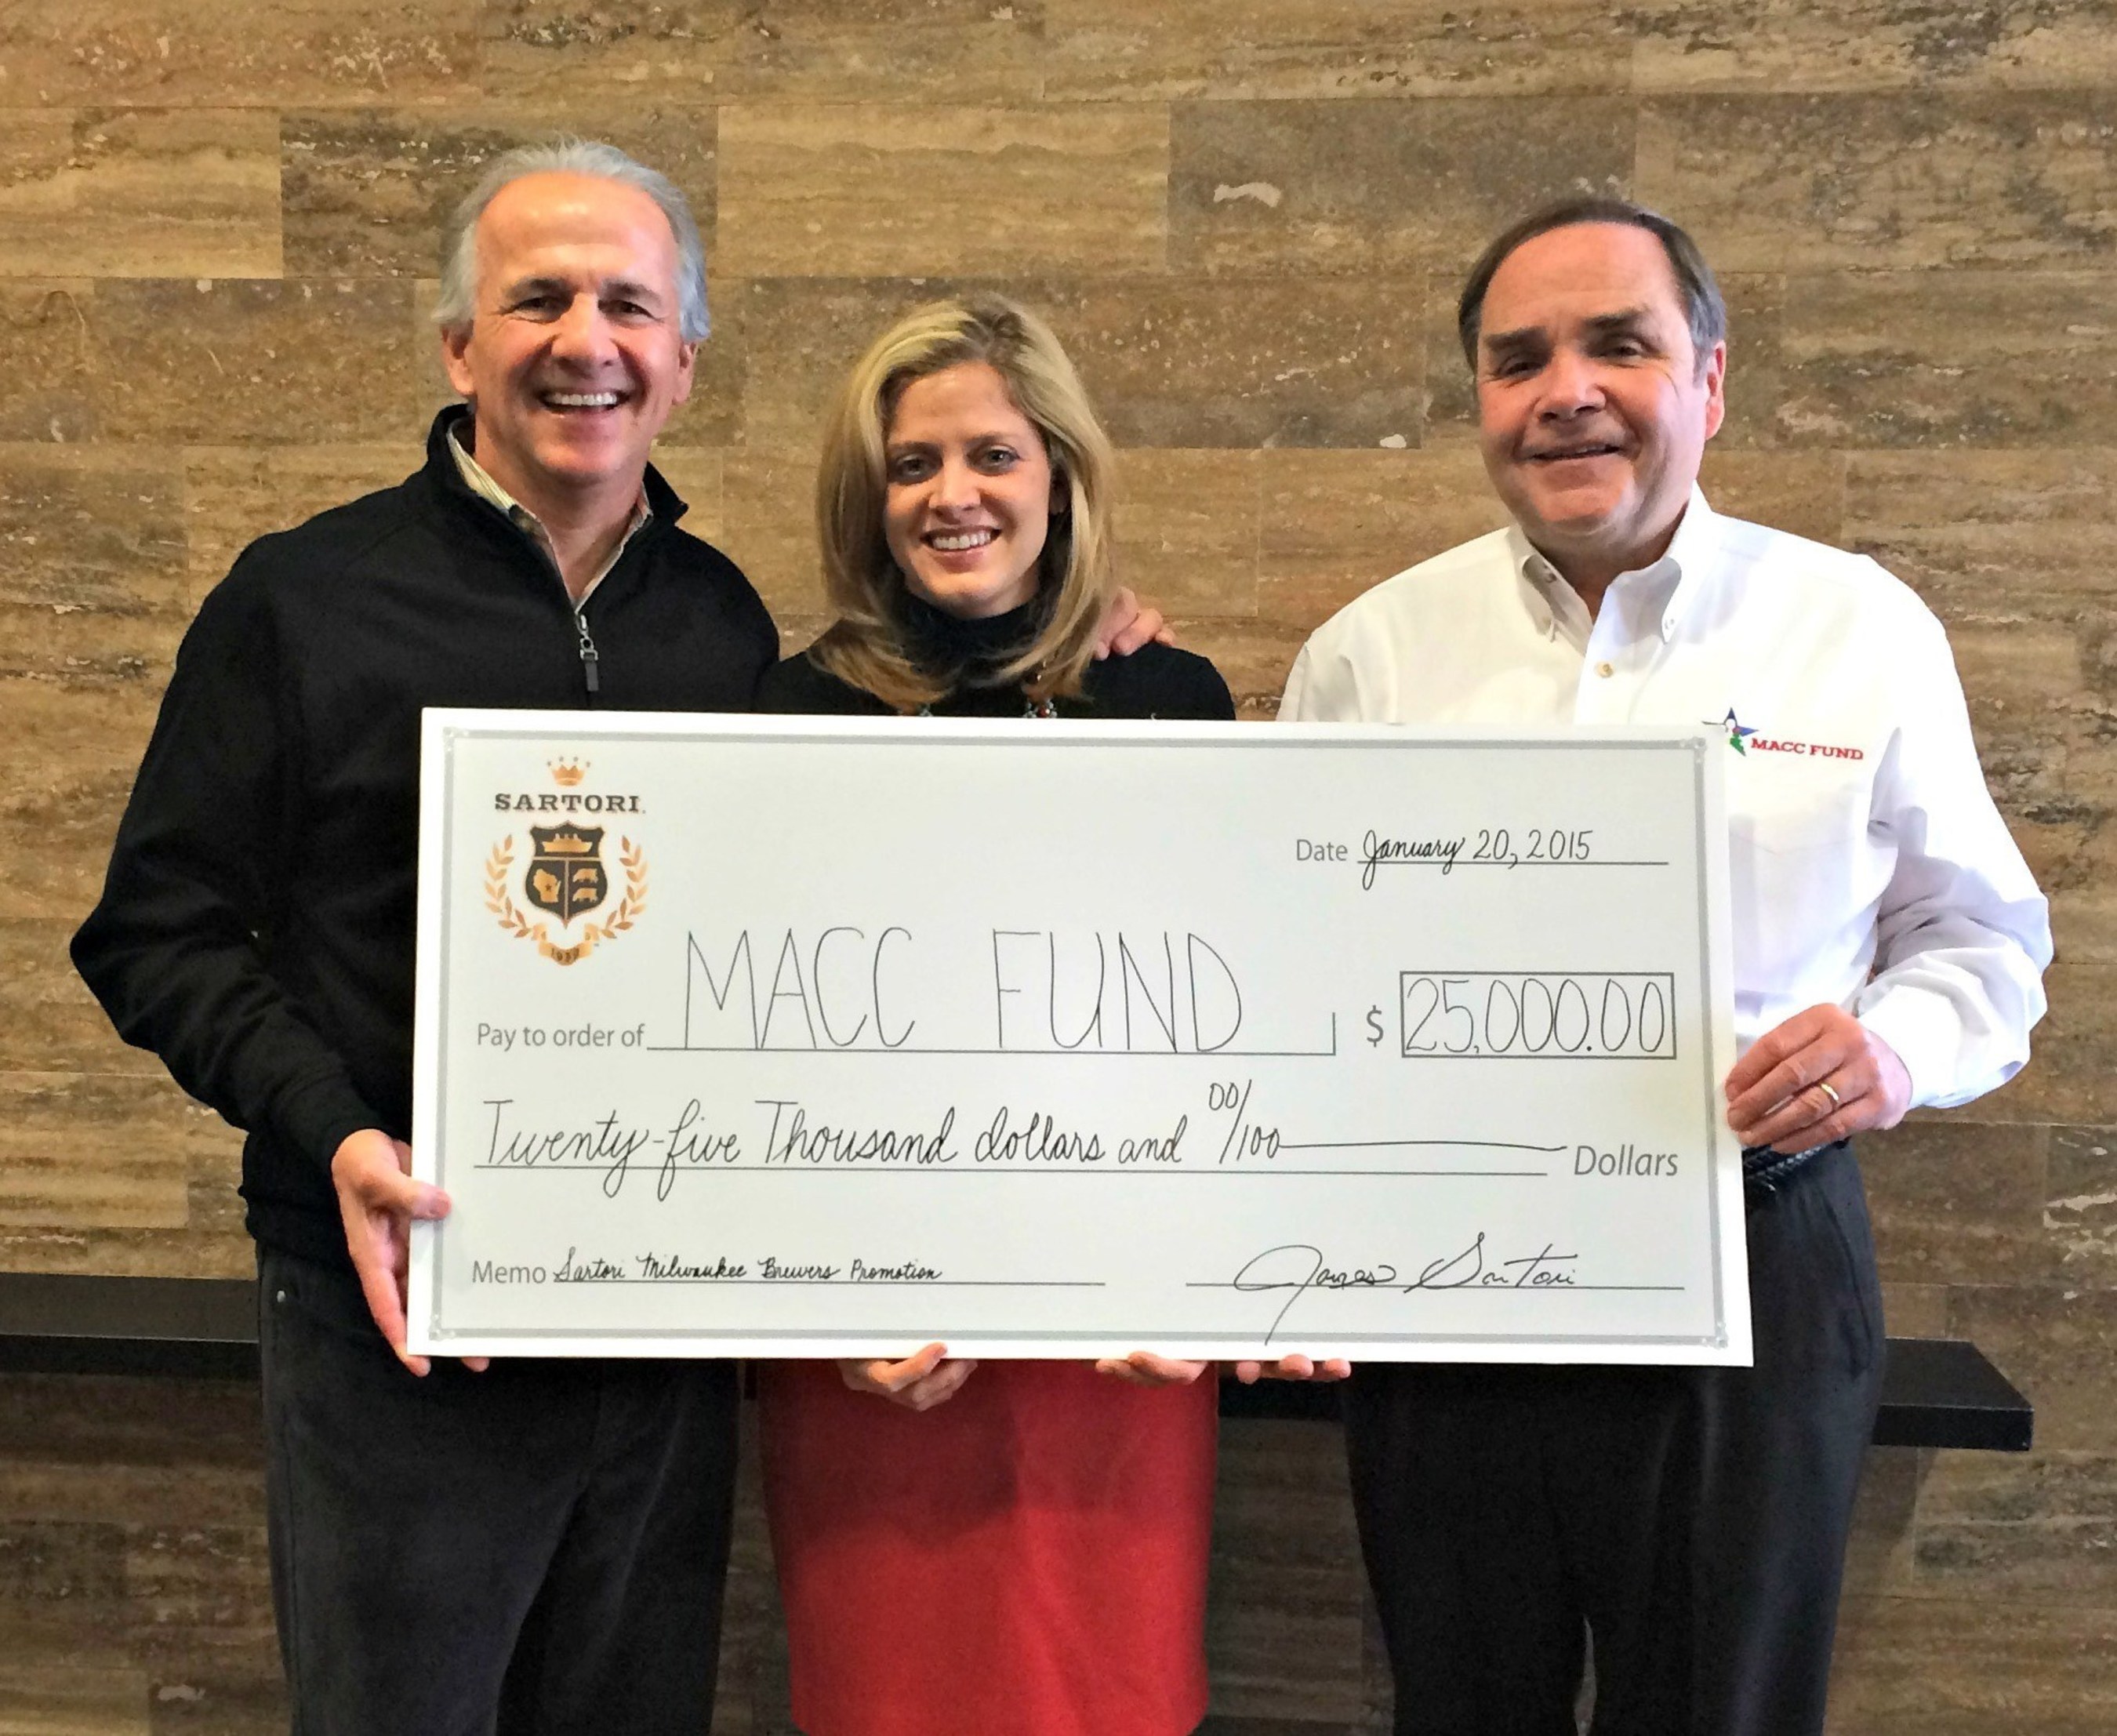 Sartori Company donates $25,000 to MACC Fund (Midwest Athletes Against Childhood Cancer) after successful partnership with Milwaukee Brewers Radio Network during the 2014 MLB season.